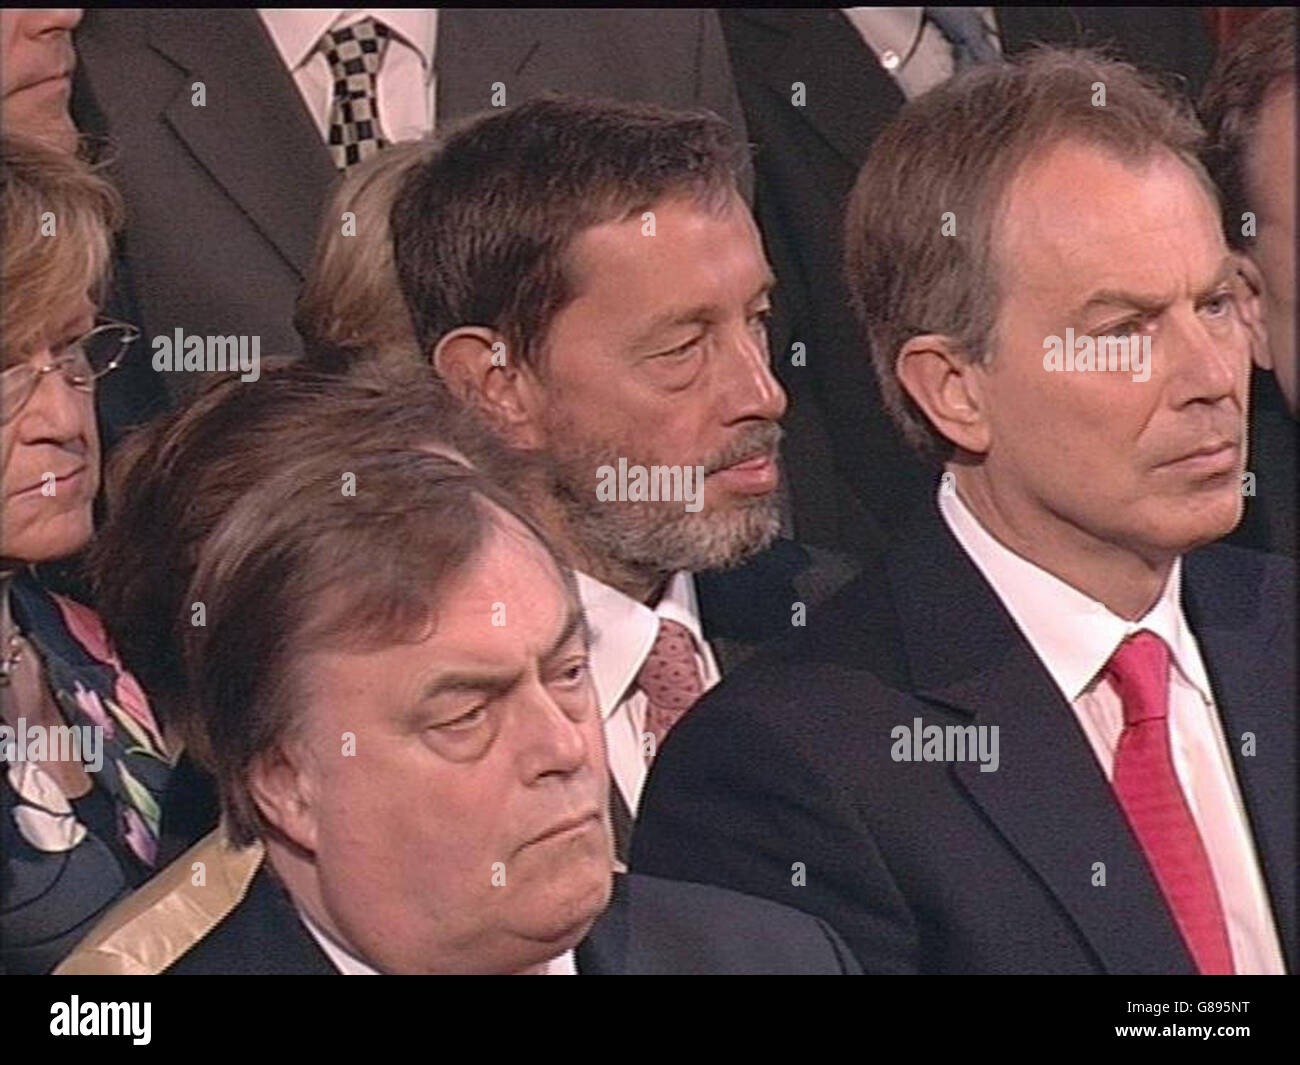 (Left to right:) Deputy Prime Minister John Prescott, Secretary of State for Work and Pensions David Blunkett and British Prime Minister Tony Blair listen as Britain's Queen Elizabeth II makes a speech in the House of Lords during the State Opening of Parliament in which she outlined the government's legislative programme for the new parliamentary session following the Labour Party's return to power in the General Election earlier this month. Stock Photo